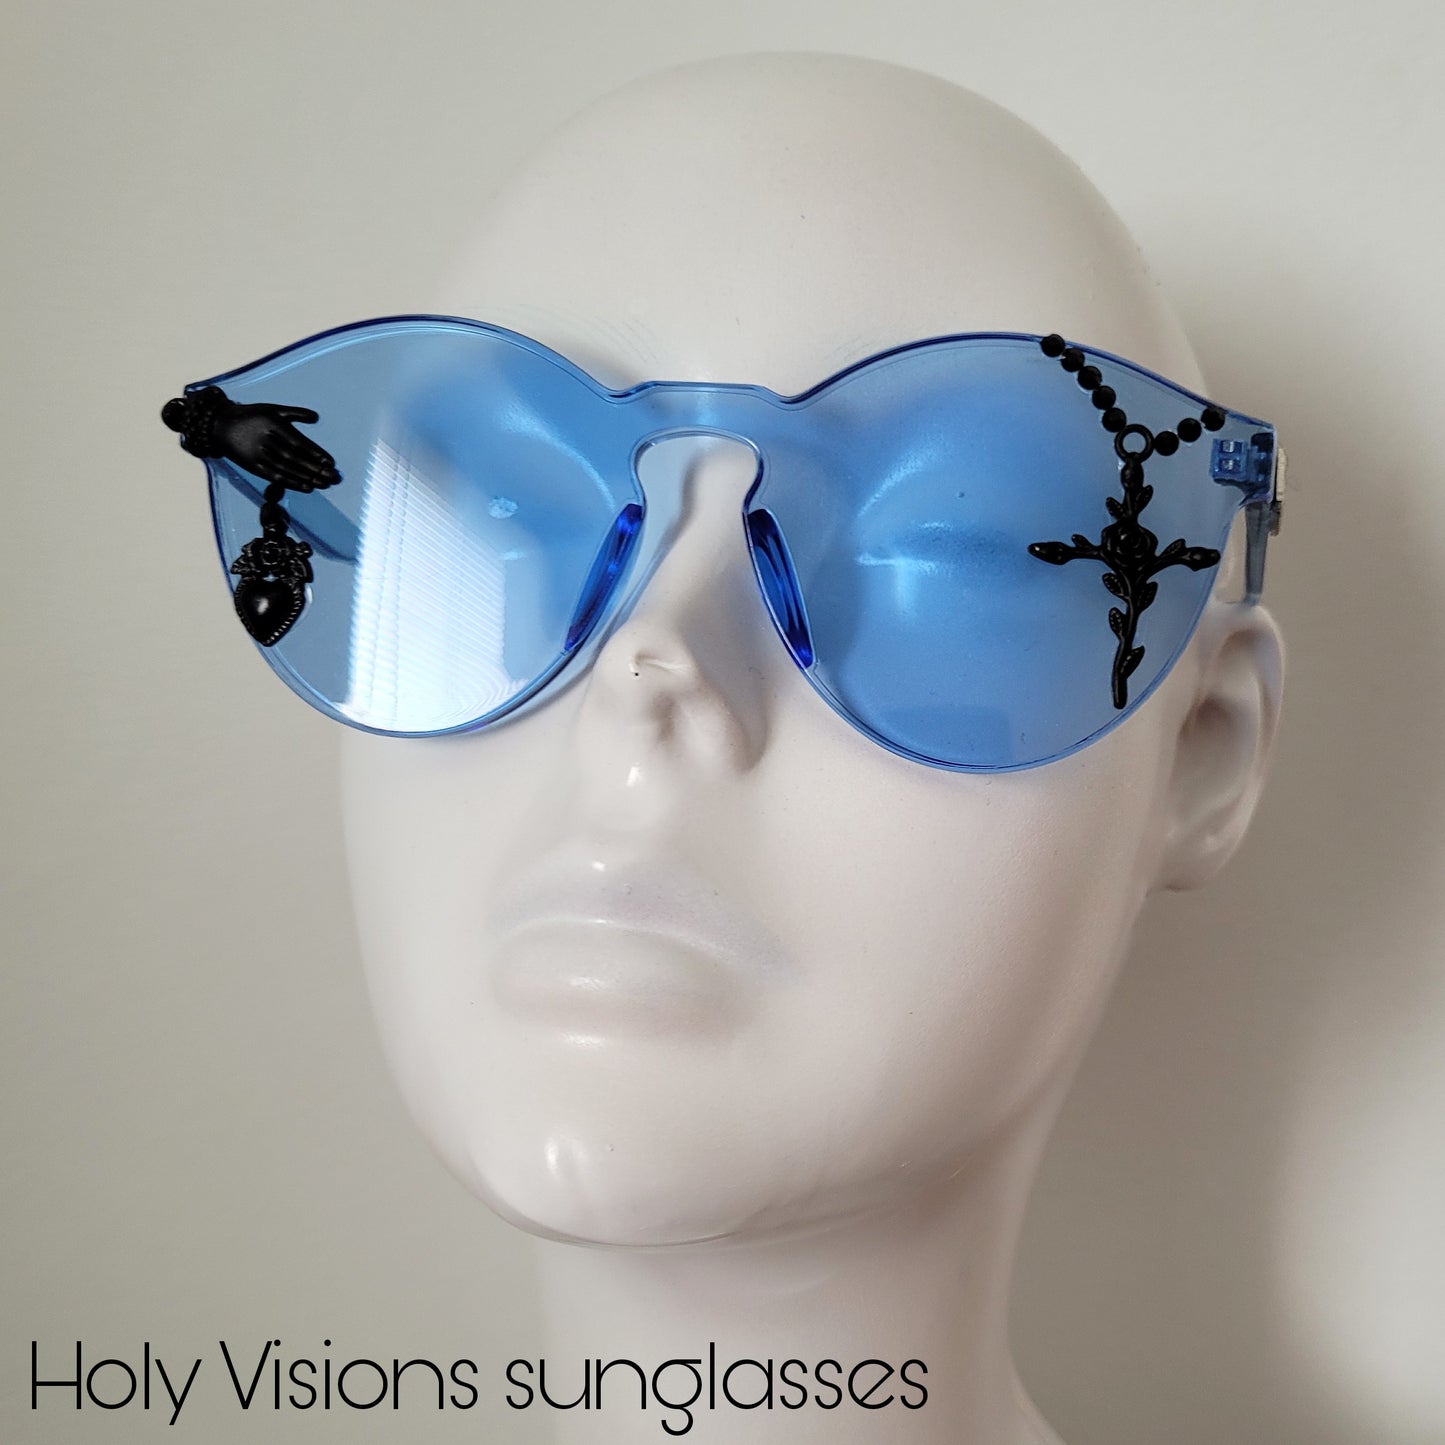 Plexi Visions collection: The Holy Visions sunglasses, limited edition design with sacred heart & crucifix (3 colours)